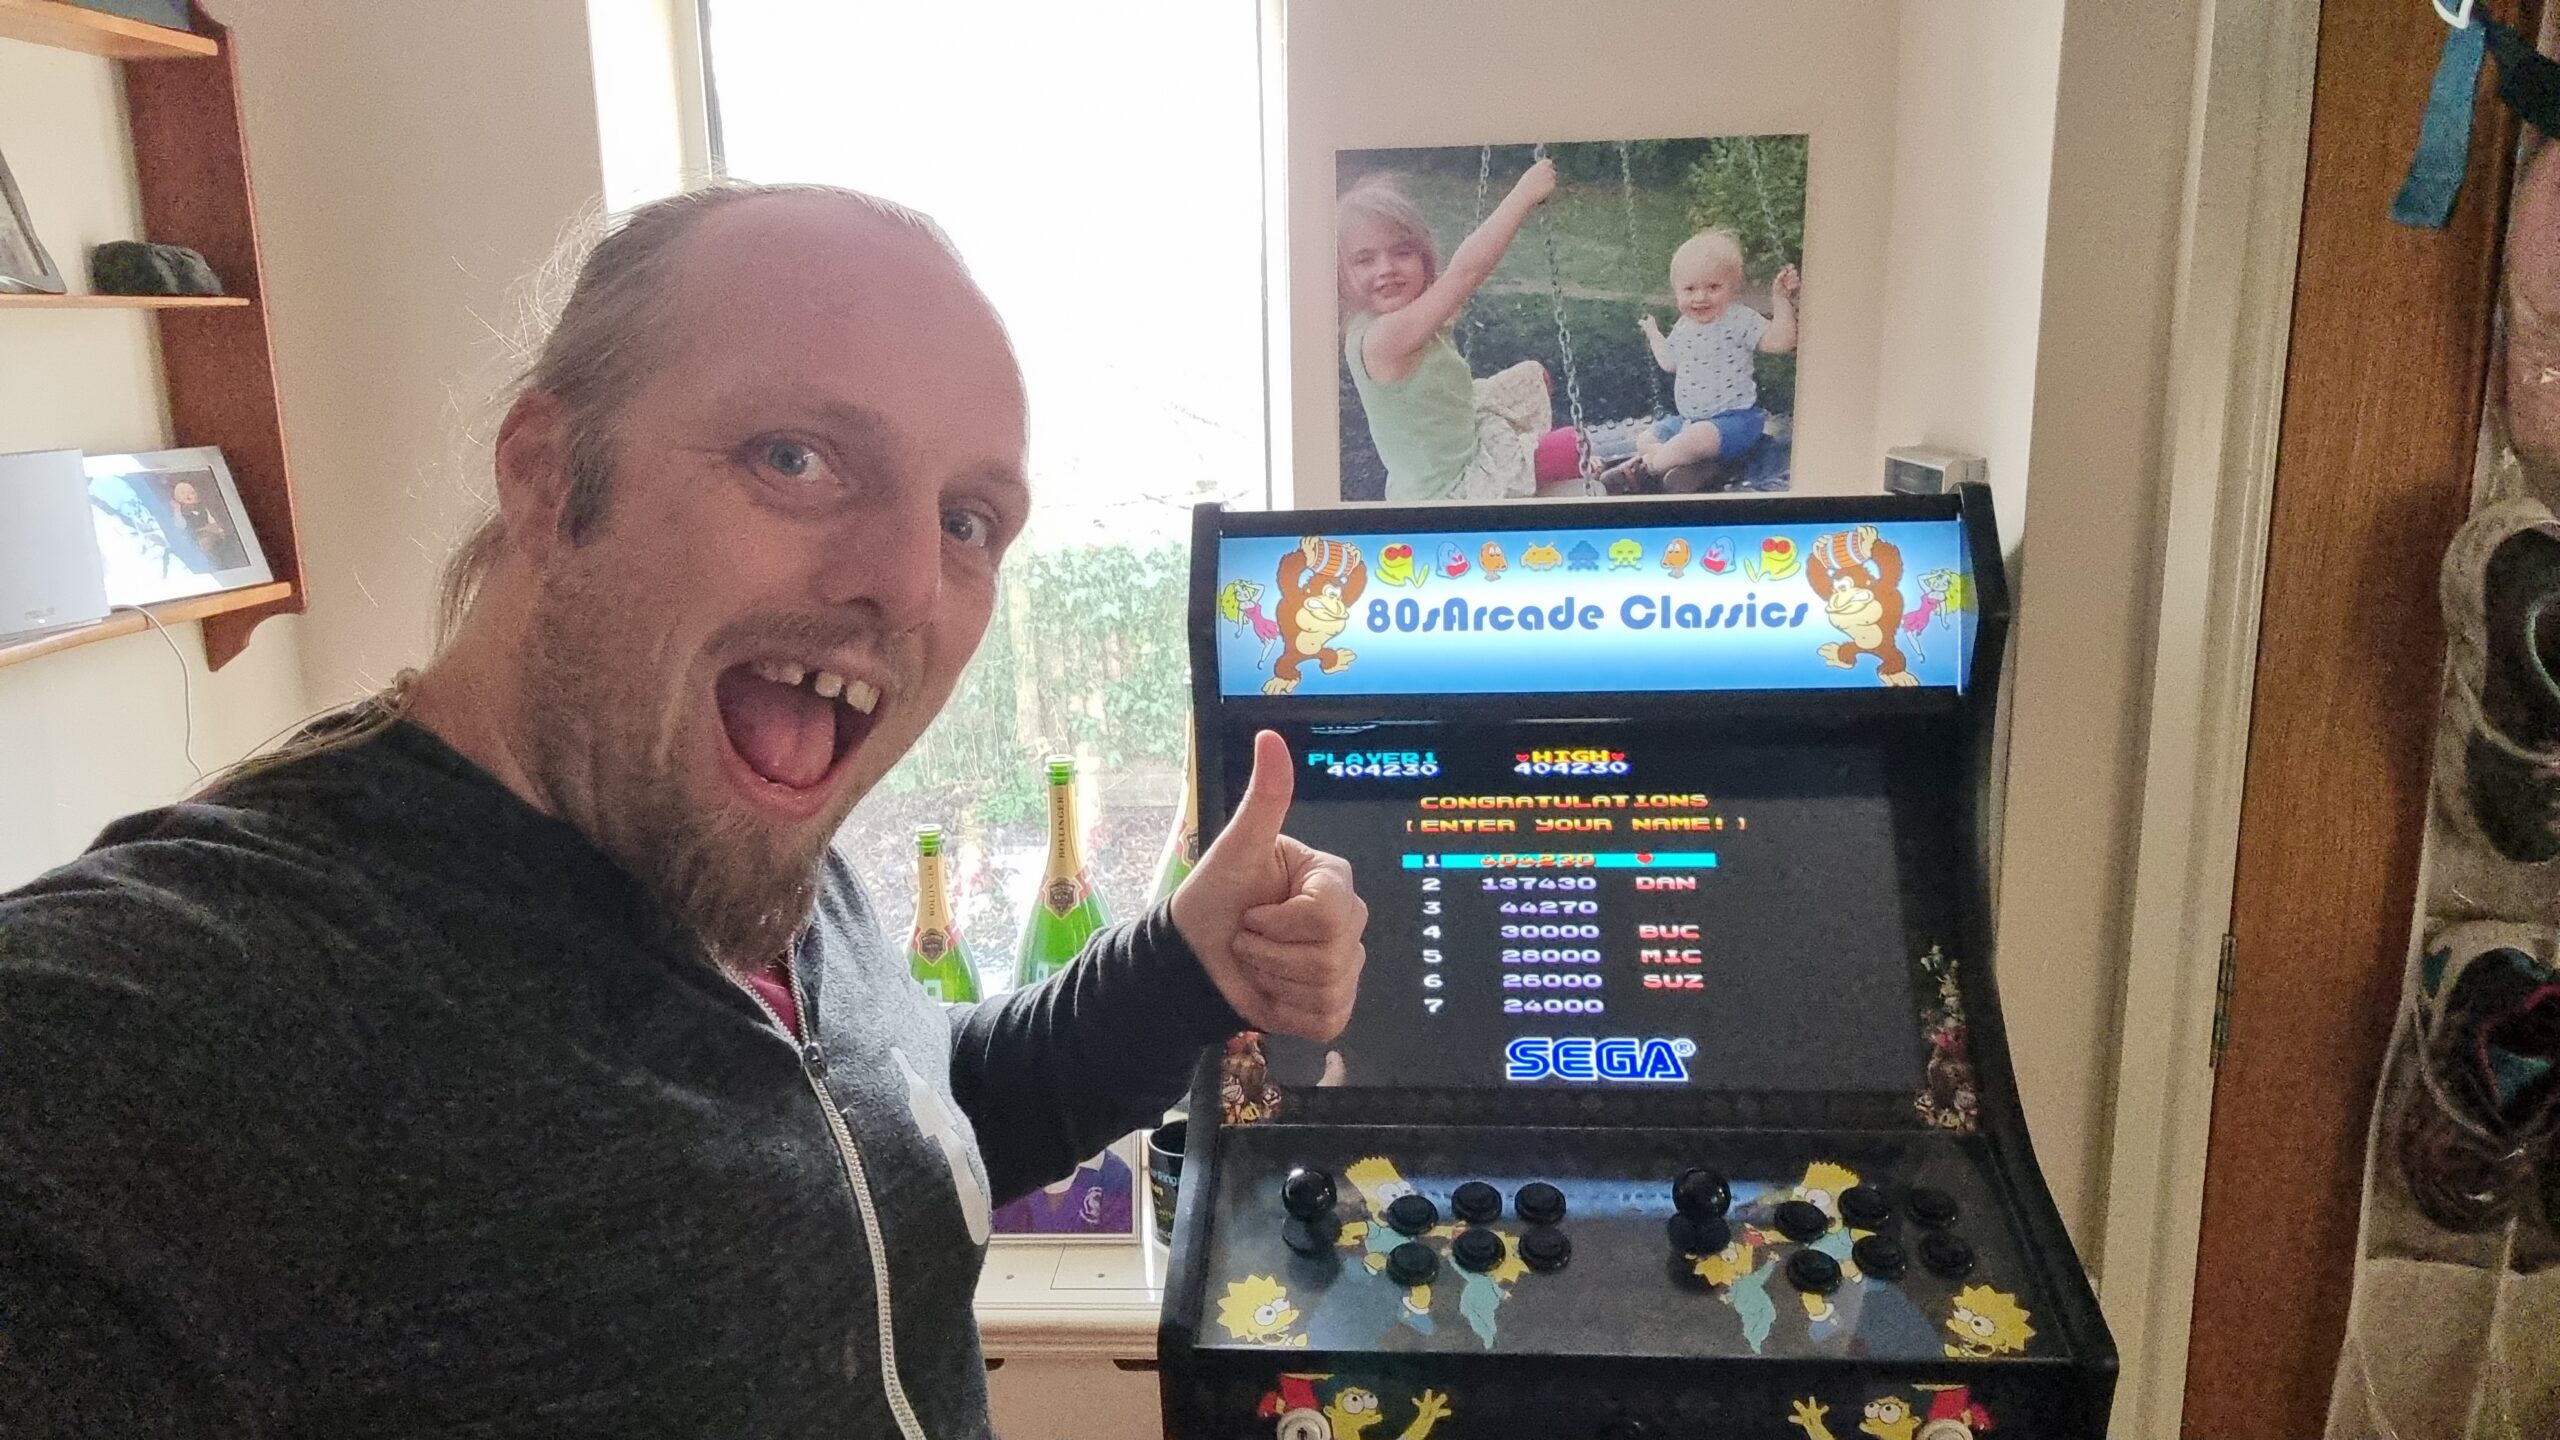 Dan with his thumbs-up in front of the high-score table (with the top-ranking spot about to be filled) of Wonder Boy, on a generic "80s Arcade Classics" arcade cabinet.